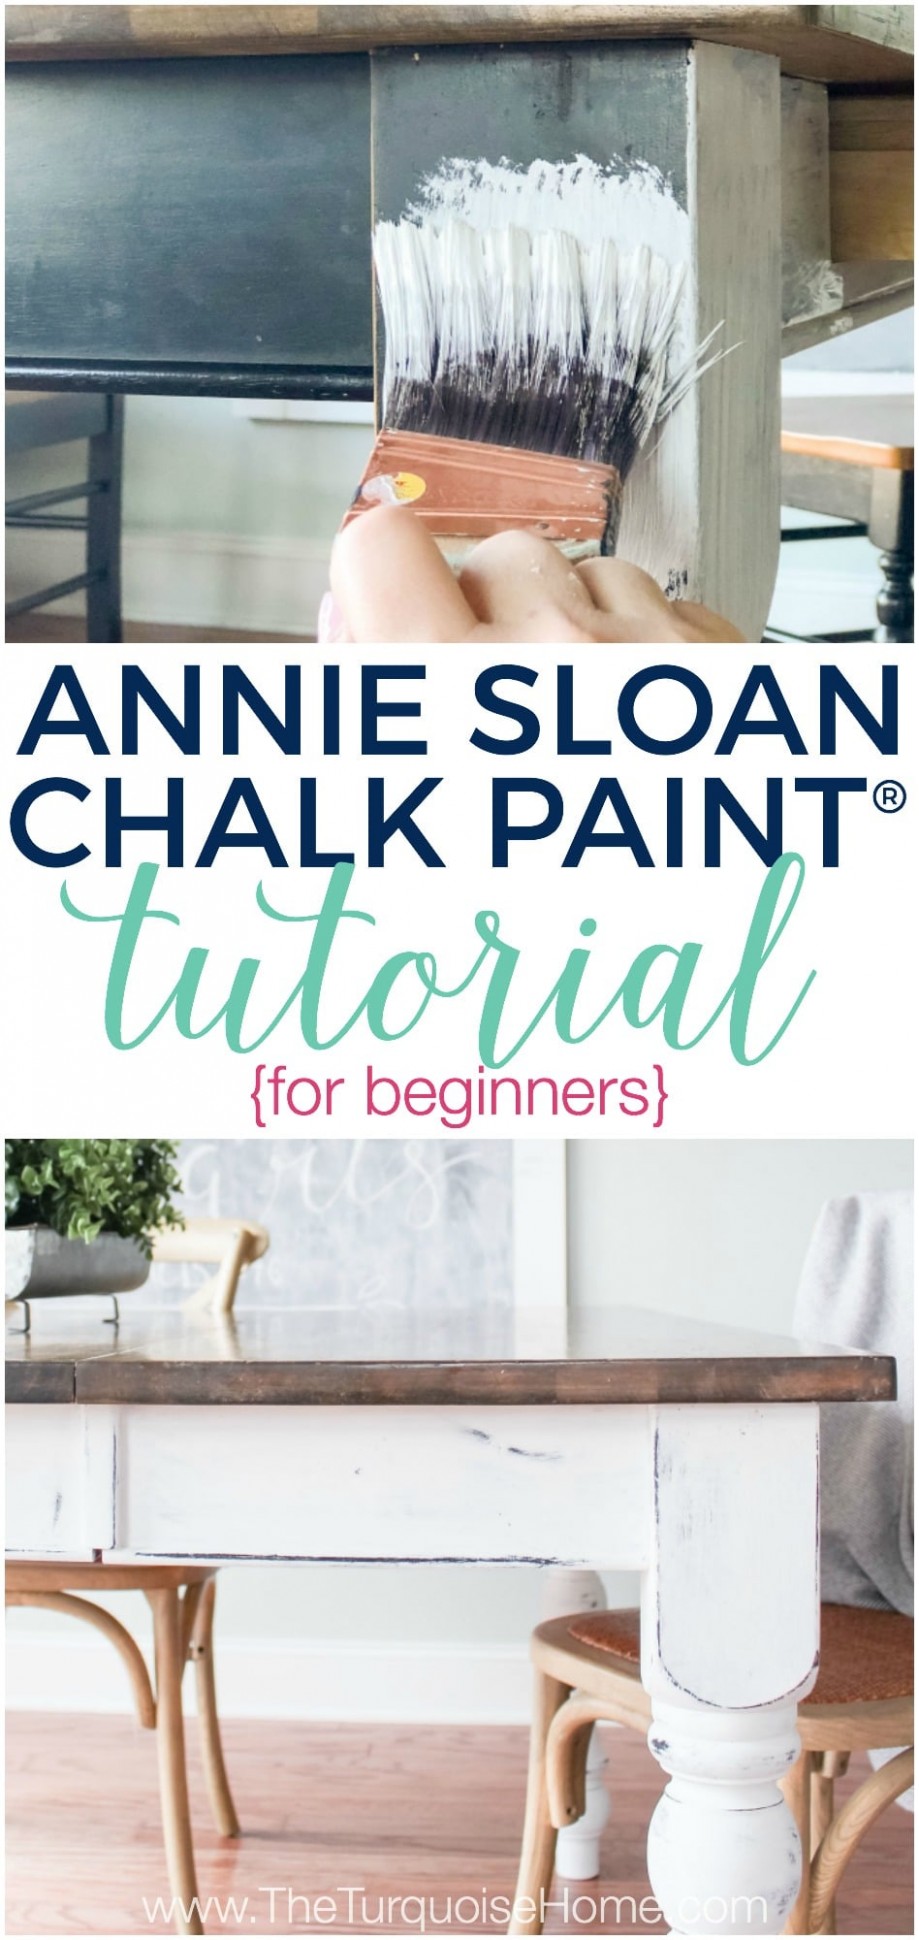 How To Use Annie Sloan Chalk Paint (perfect For Beginners!) Where Can You Buy Annie Sloan Chalk Paint